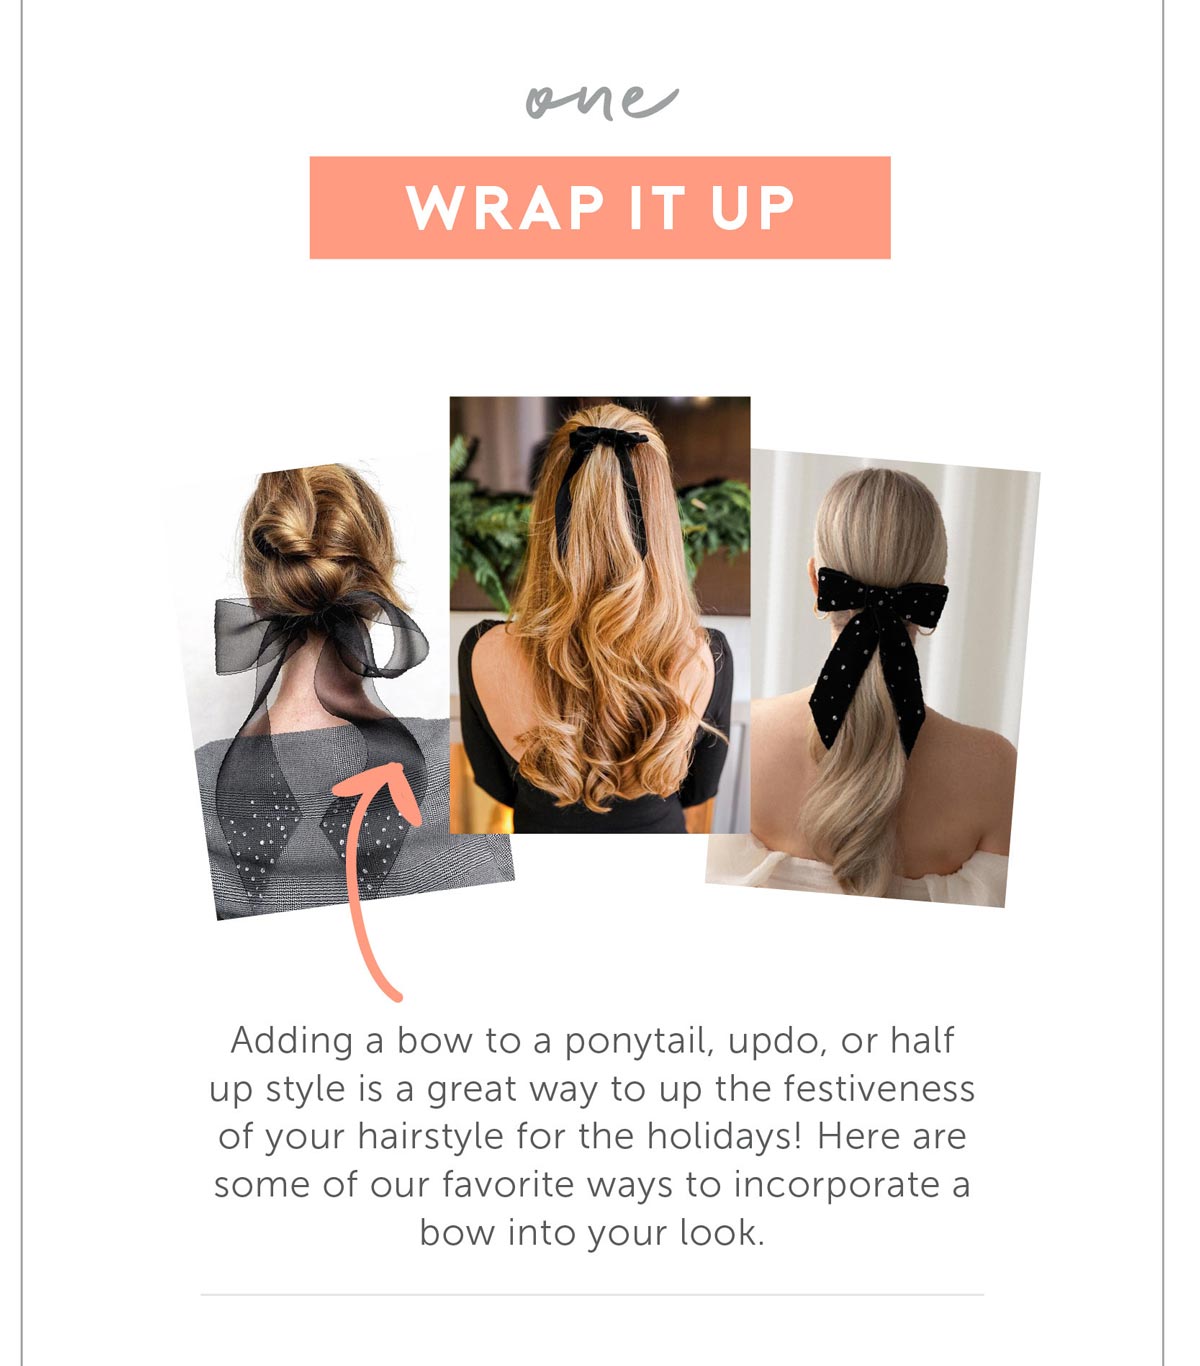 Wrap it up! Adding a bow to a ponytail, updo, or half up style is a great way to up the festiveness of your hairstyle for the holidays! Here are some of our favorite ways to incorporate a bow into your look.